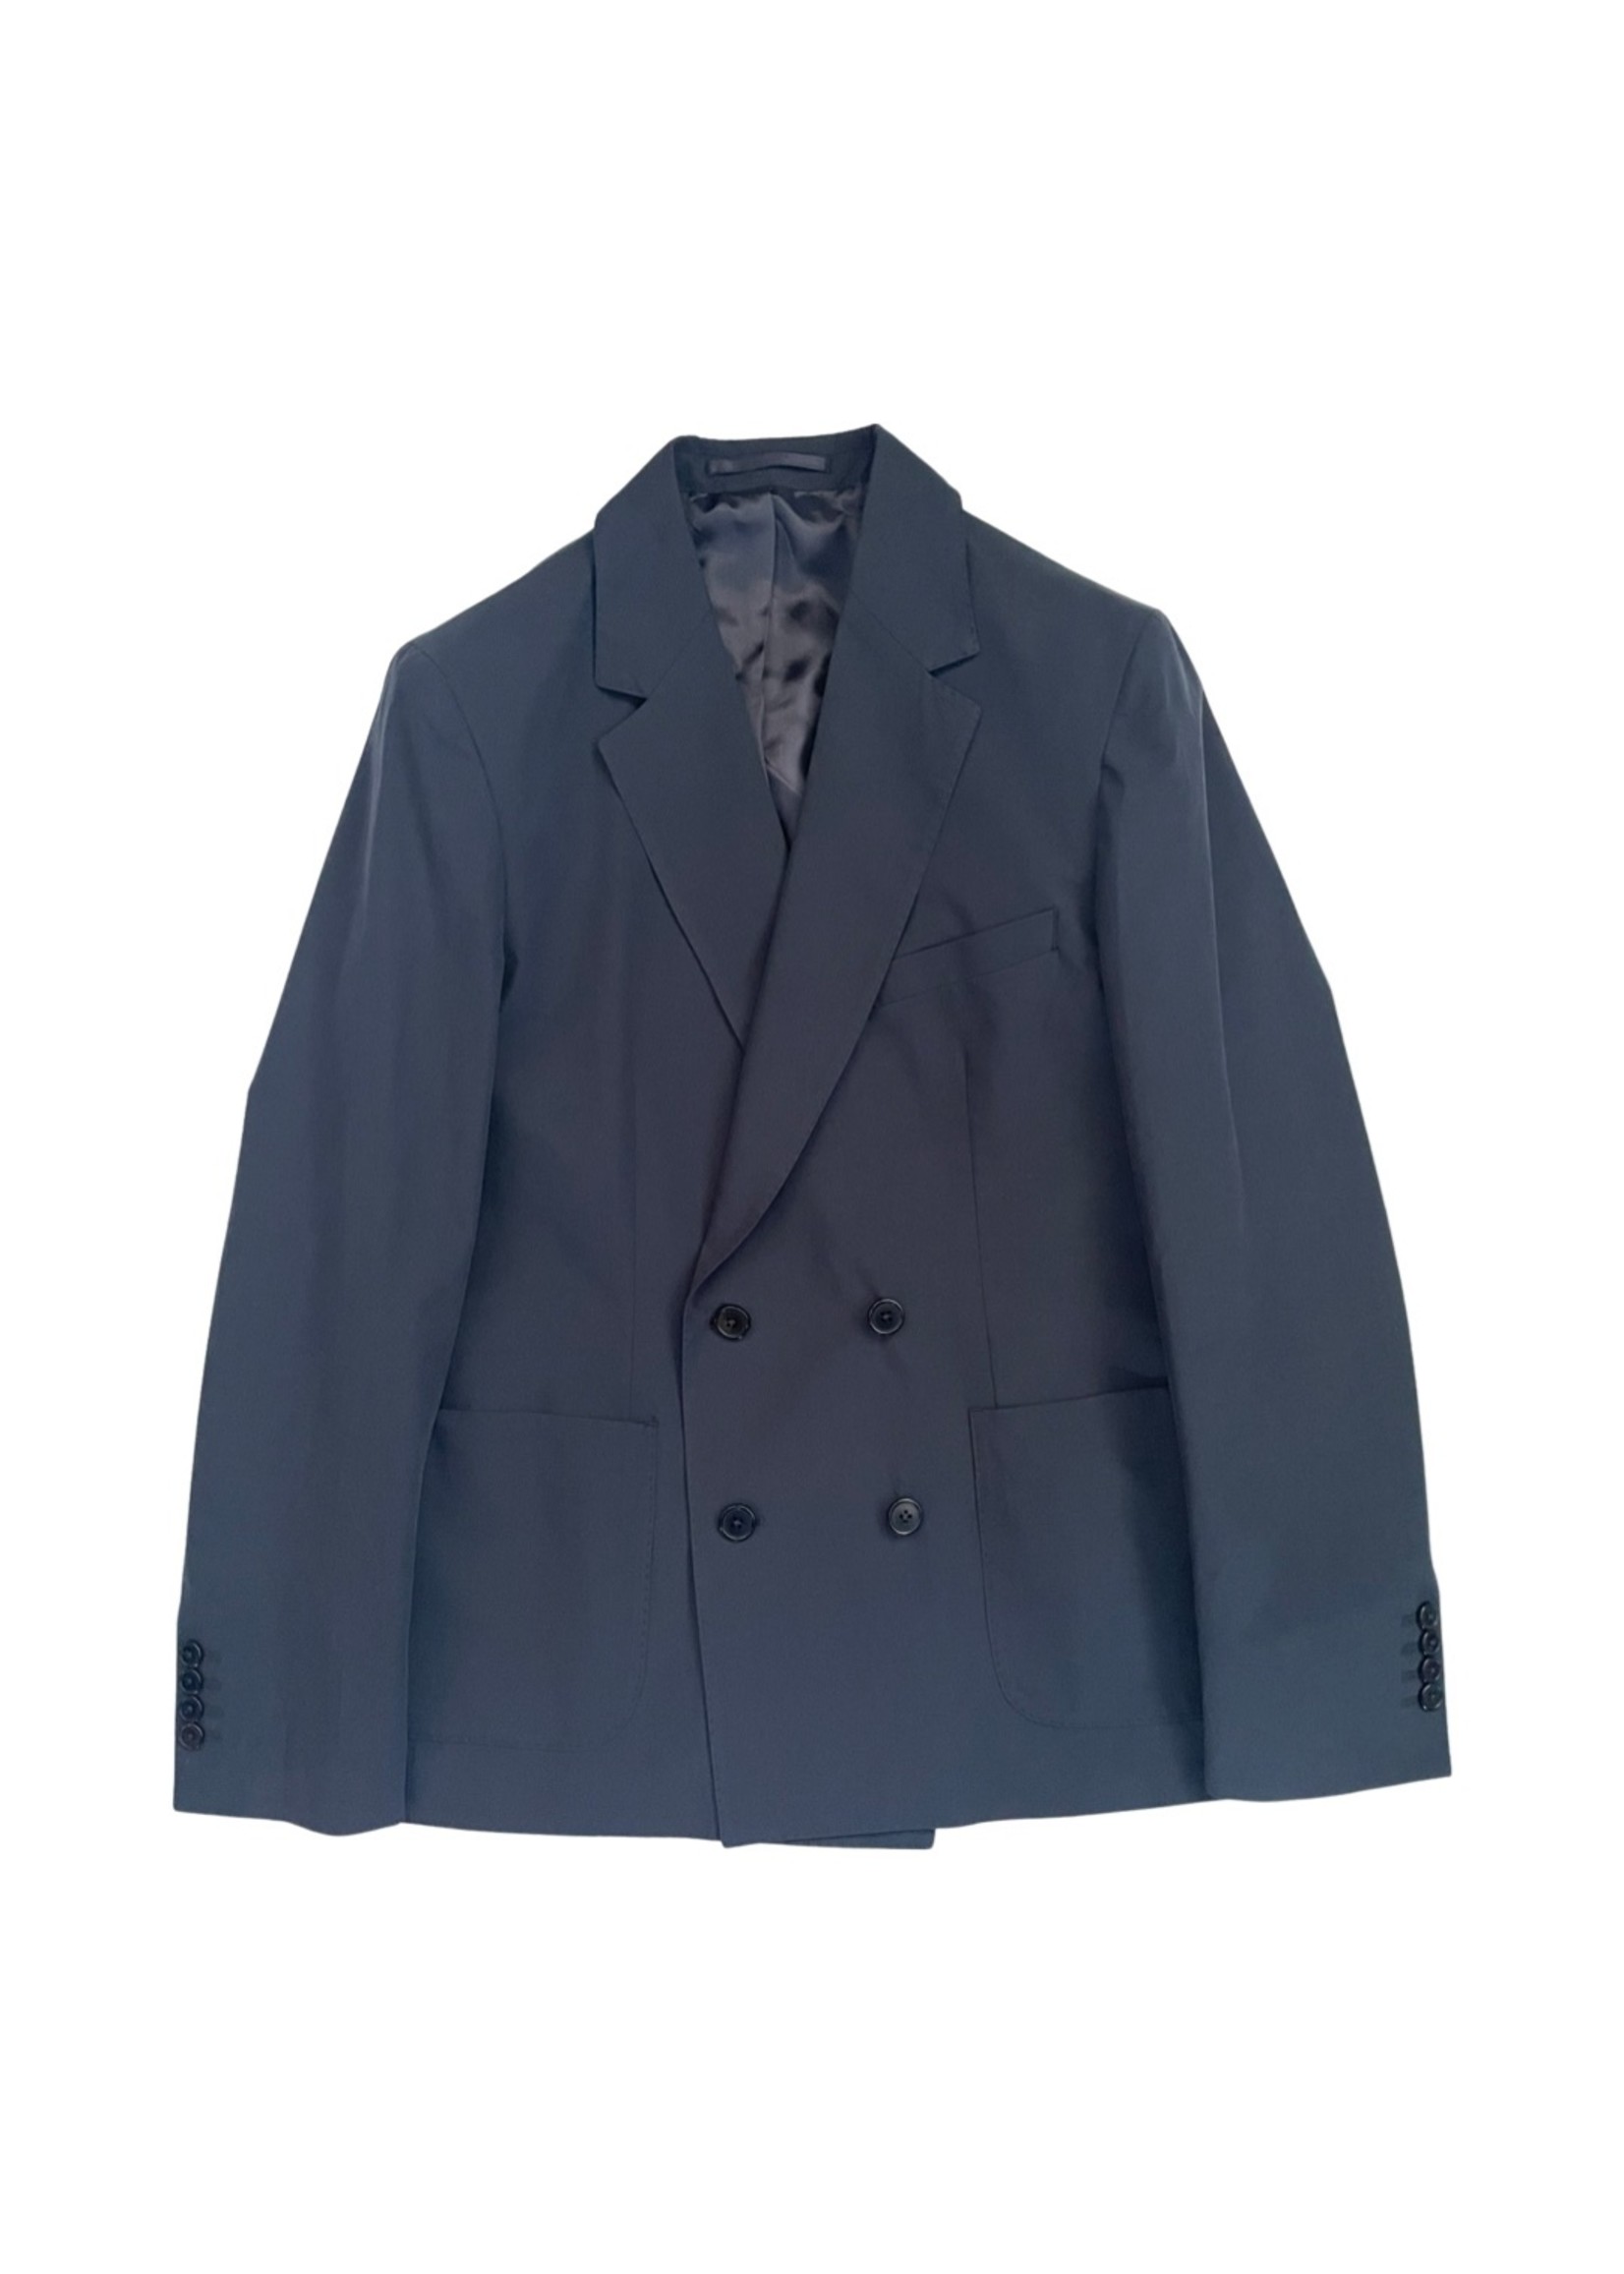 OFFICINE GENERALE LEON DOUBLE BREASTED JACKET